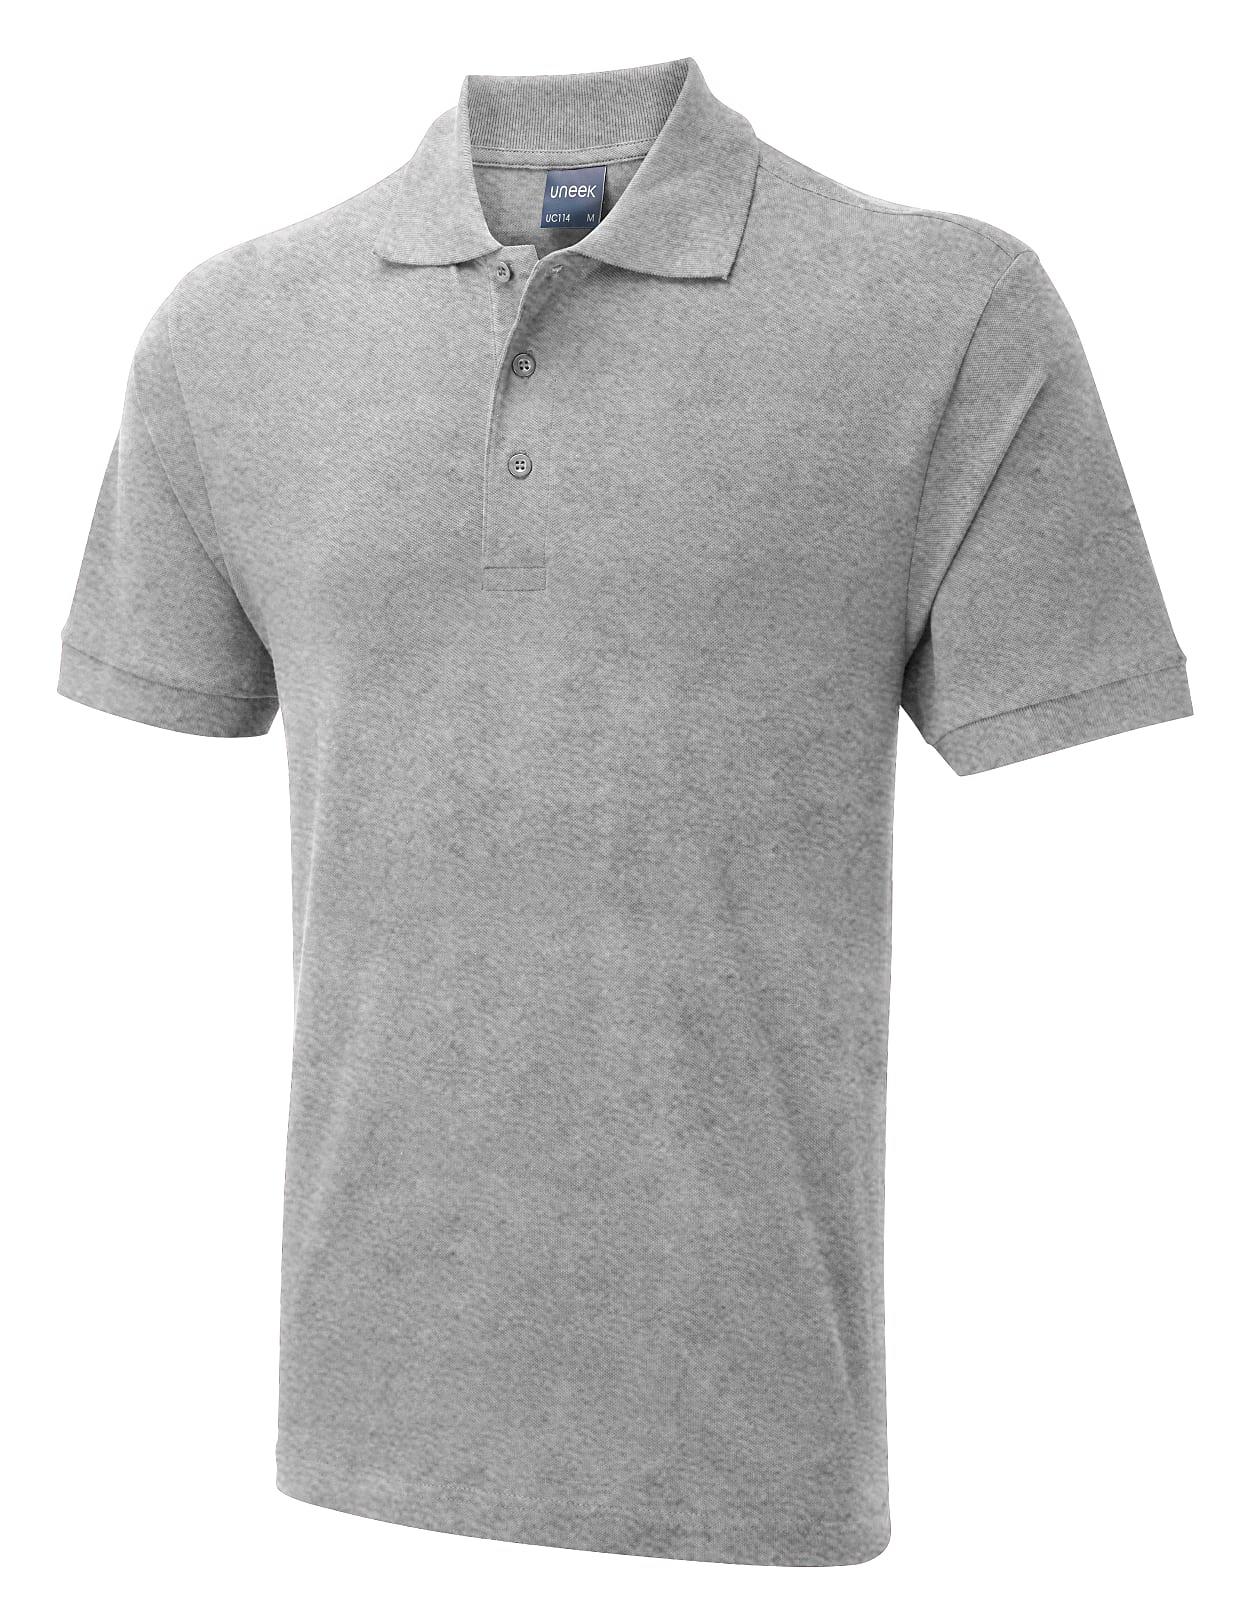 Uneek 180GSM Mens Polo Shirt in Heather Grey (Product Code: UC114)